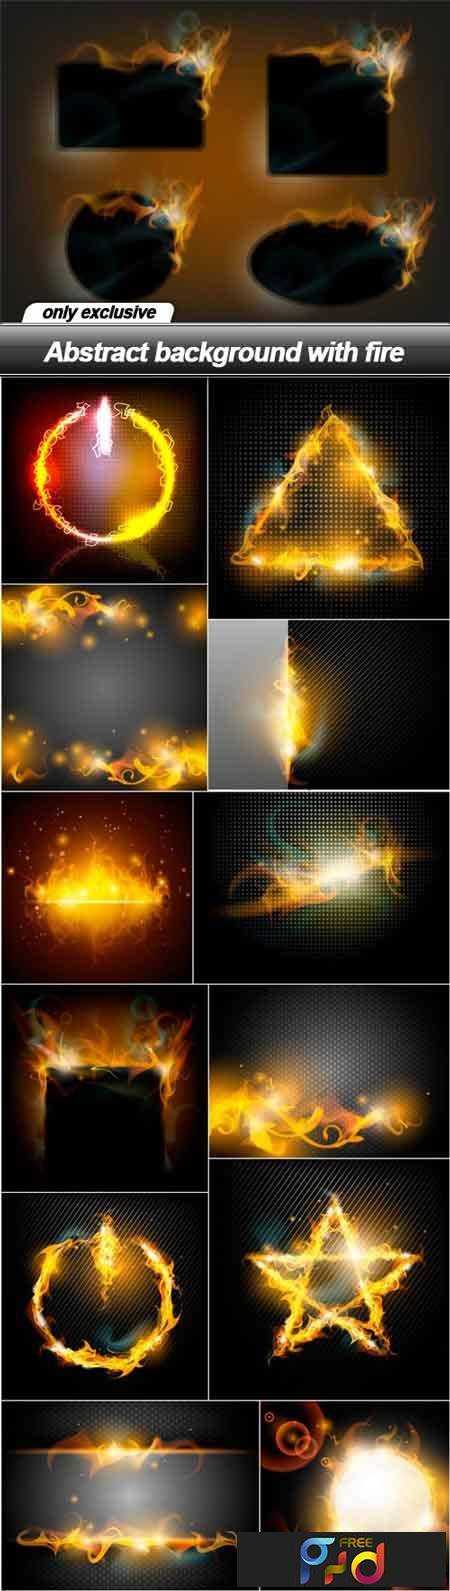 freepsdvn-com_1475697178_abstract-background-with-fire-13-eps